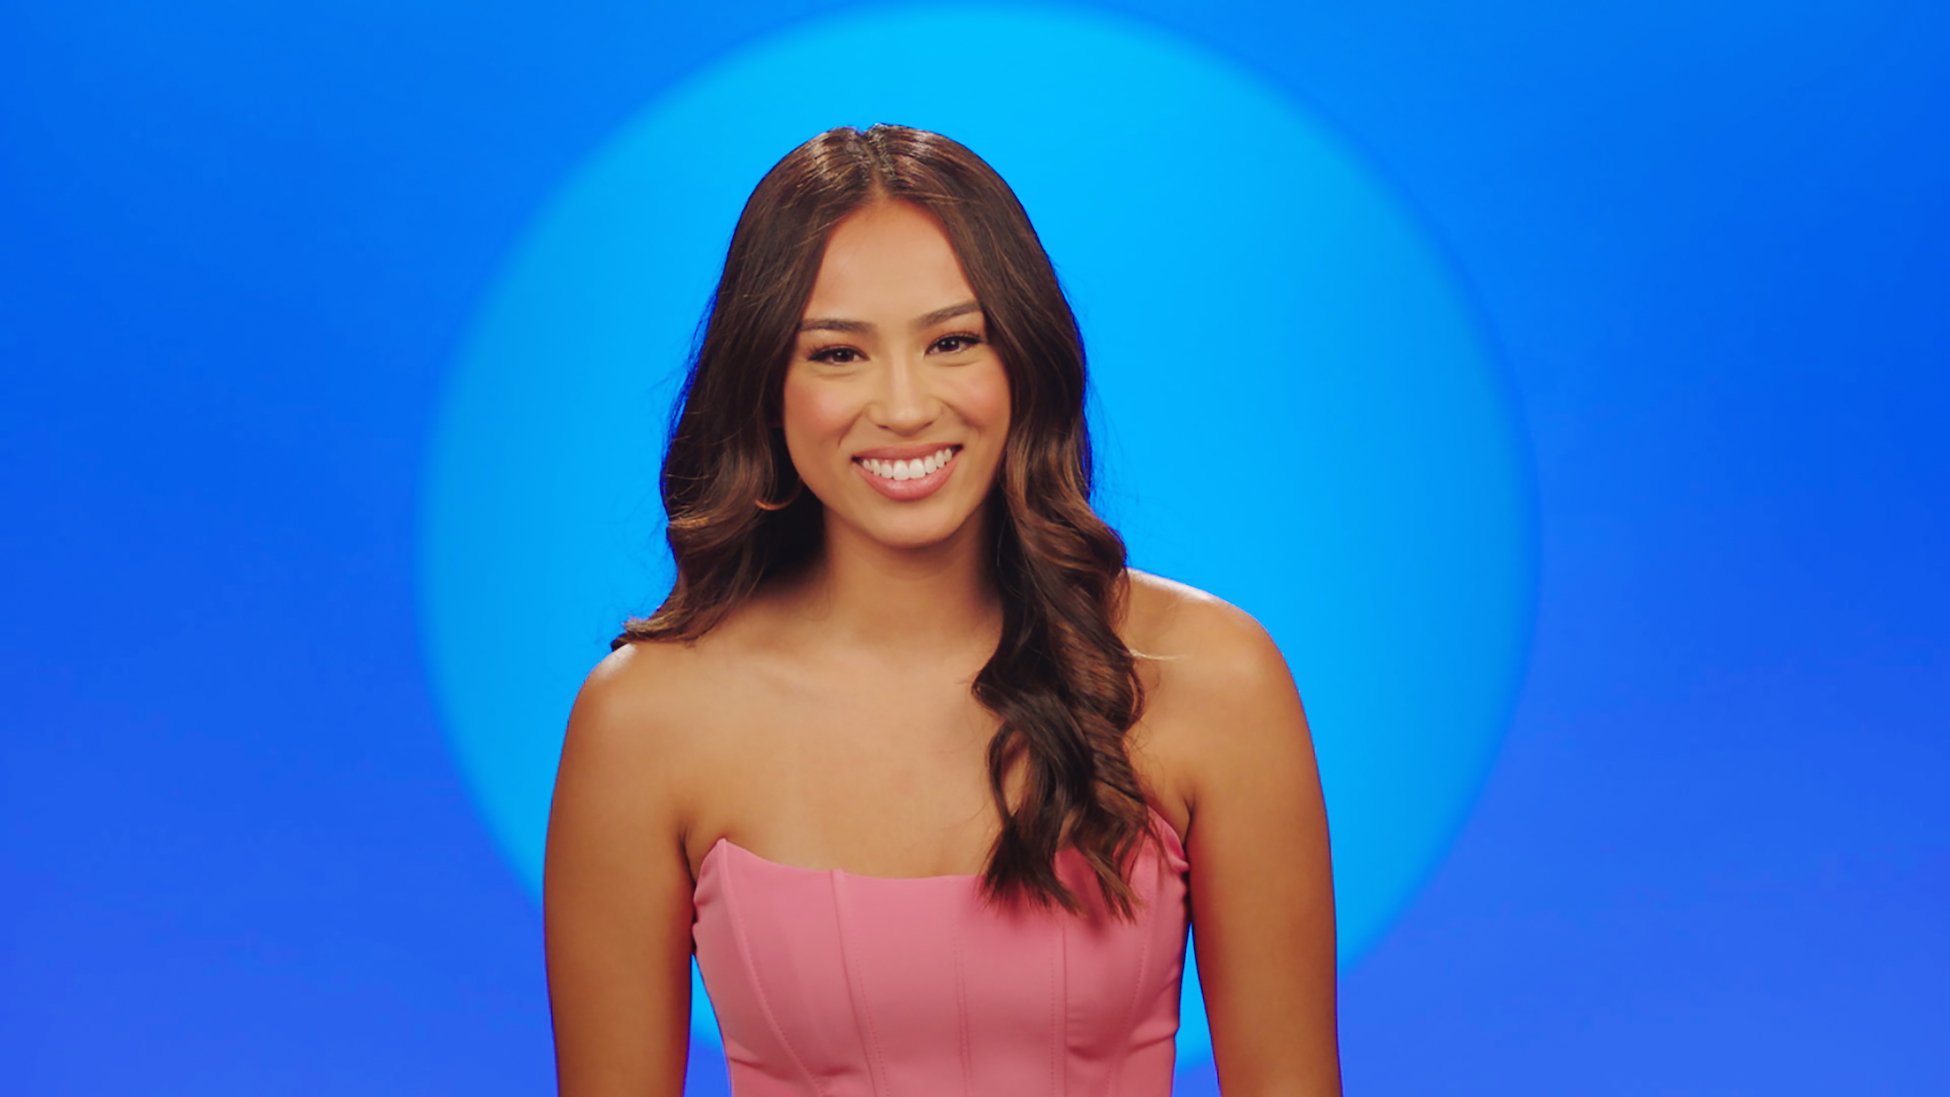 'The Circle': How Much Money Does Savannah Palacio Make From Instagram?